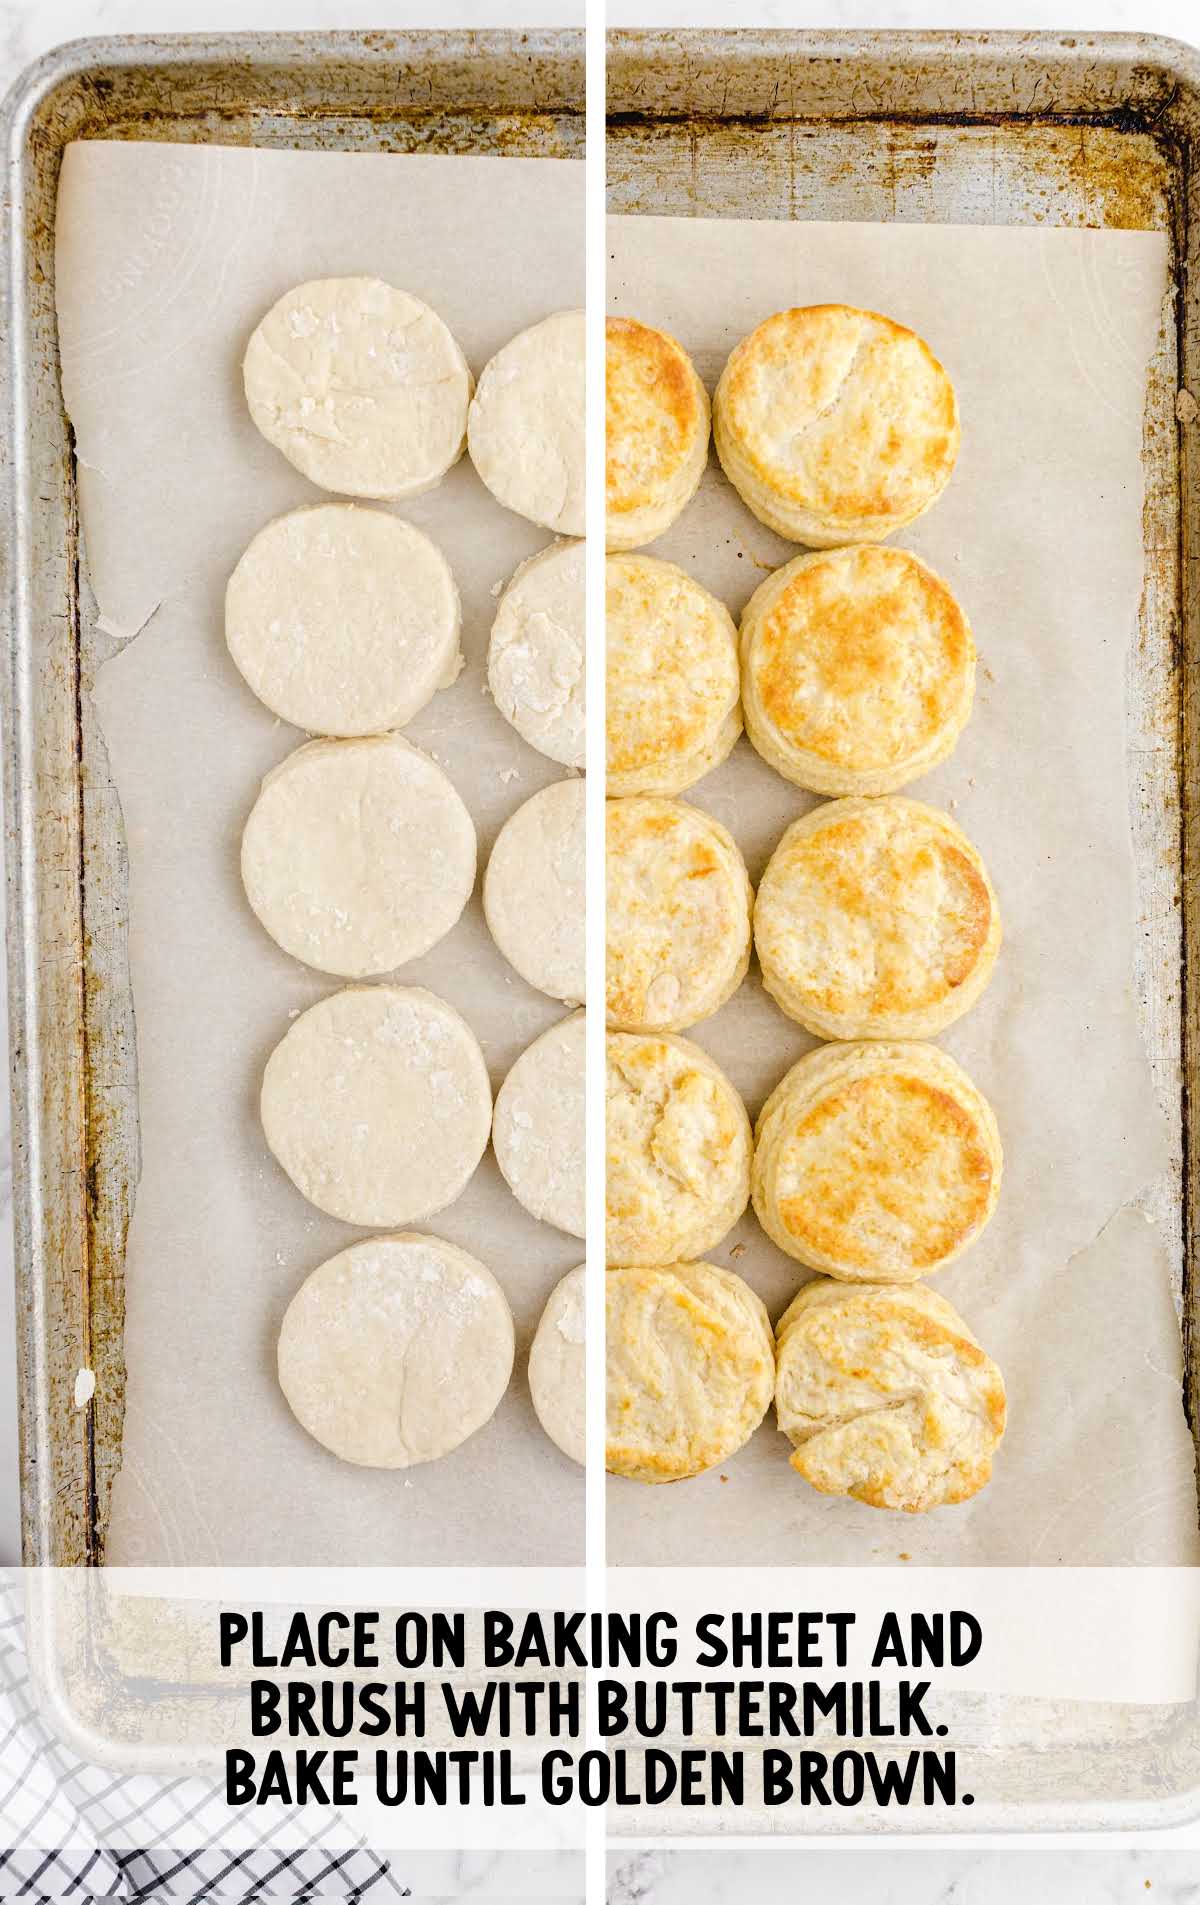 biscuits before and after being baked on a tray